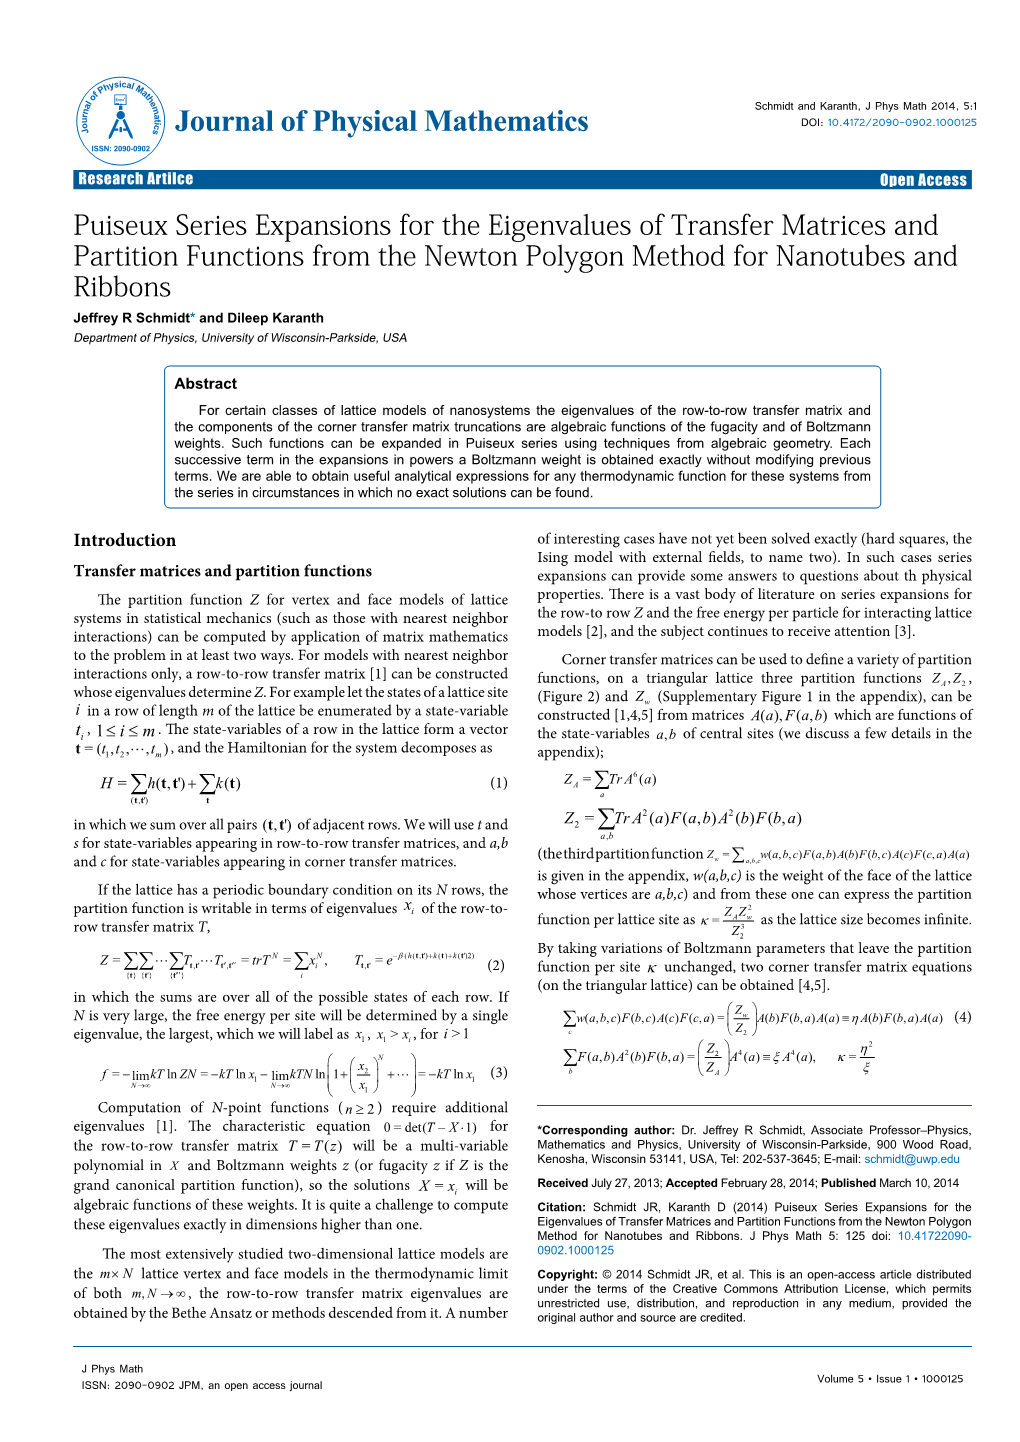 Puiseux Series Expansions for the Eigenvalues of Transfer Matrices